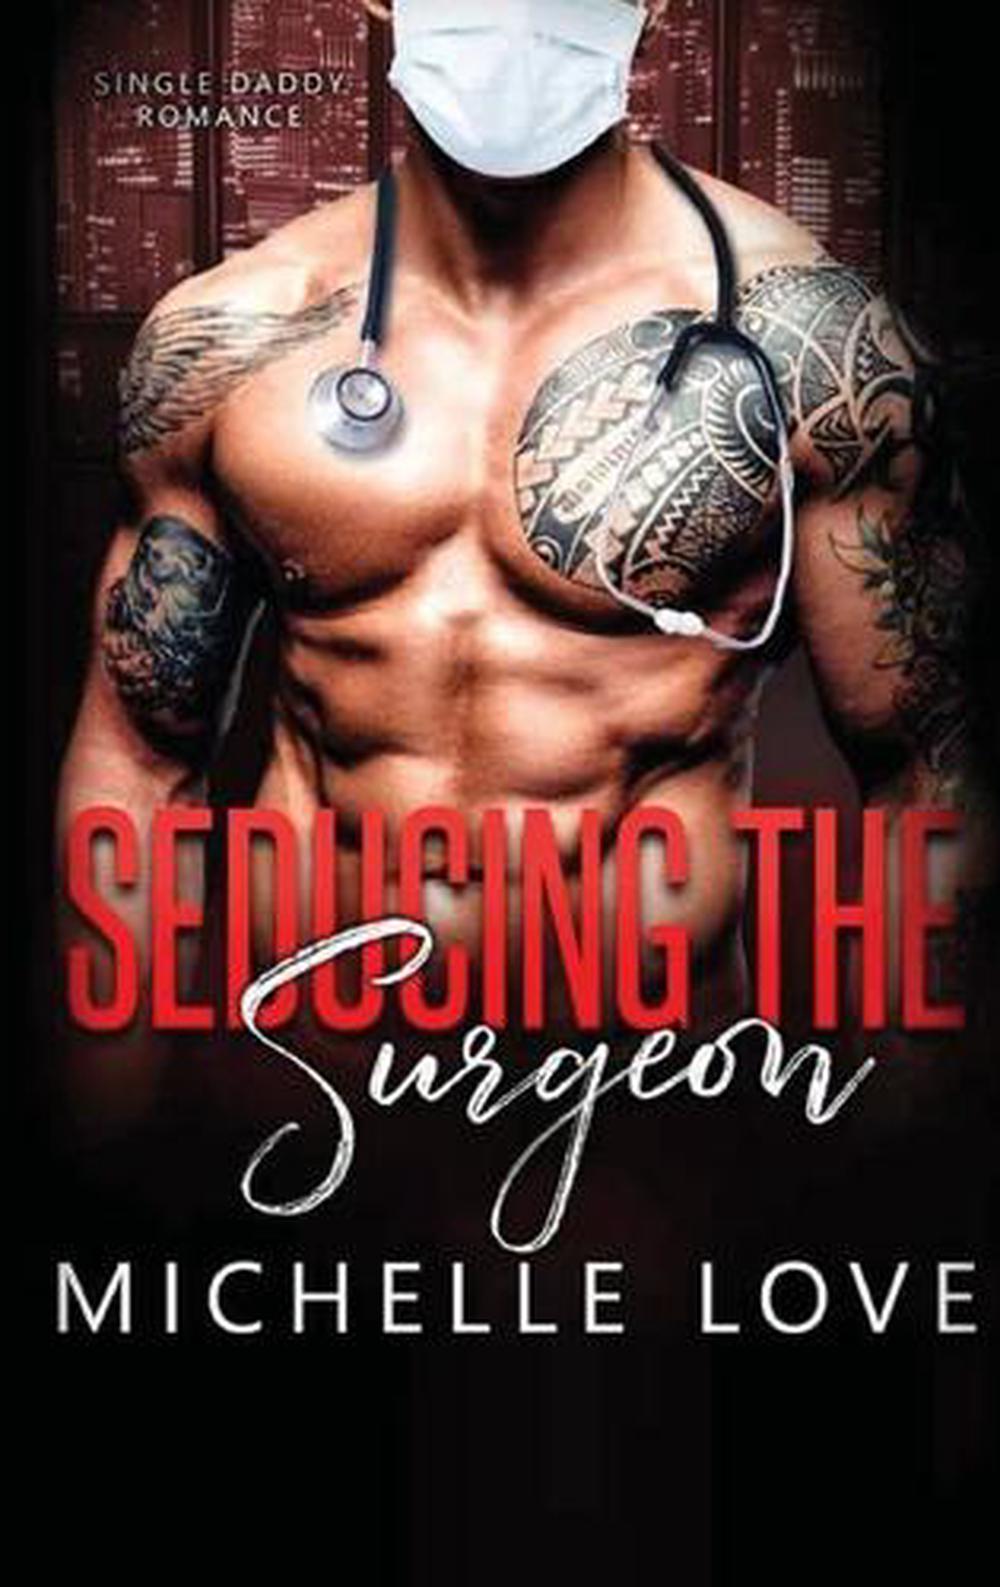 Seducing The Surgeon A Single Daddy Romance By Michelle Love English 